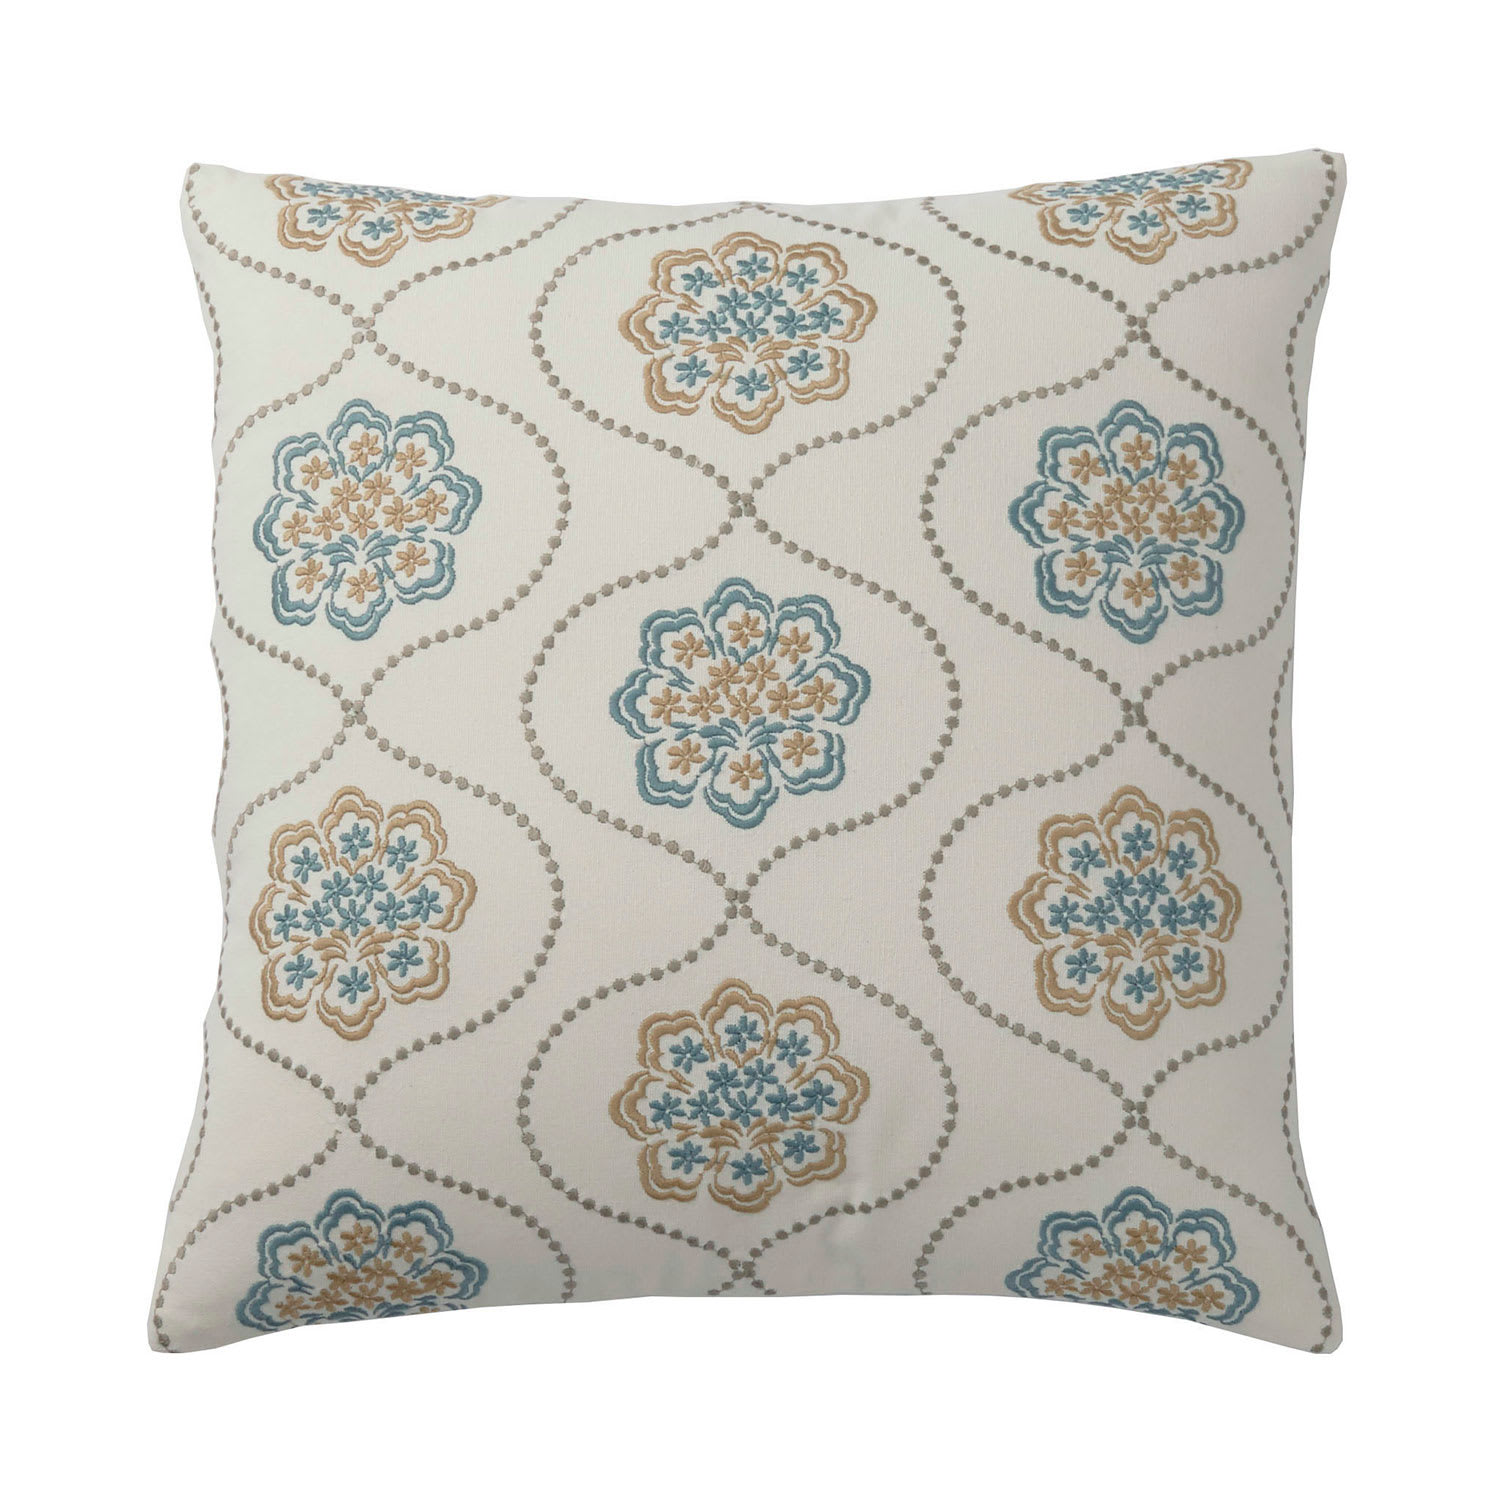 Neutral Damask Embroidered Pillow Cover - Damask